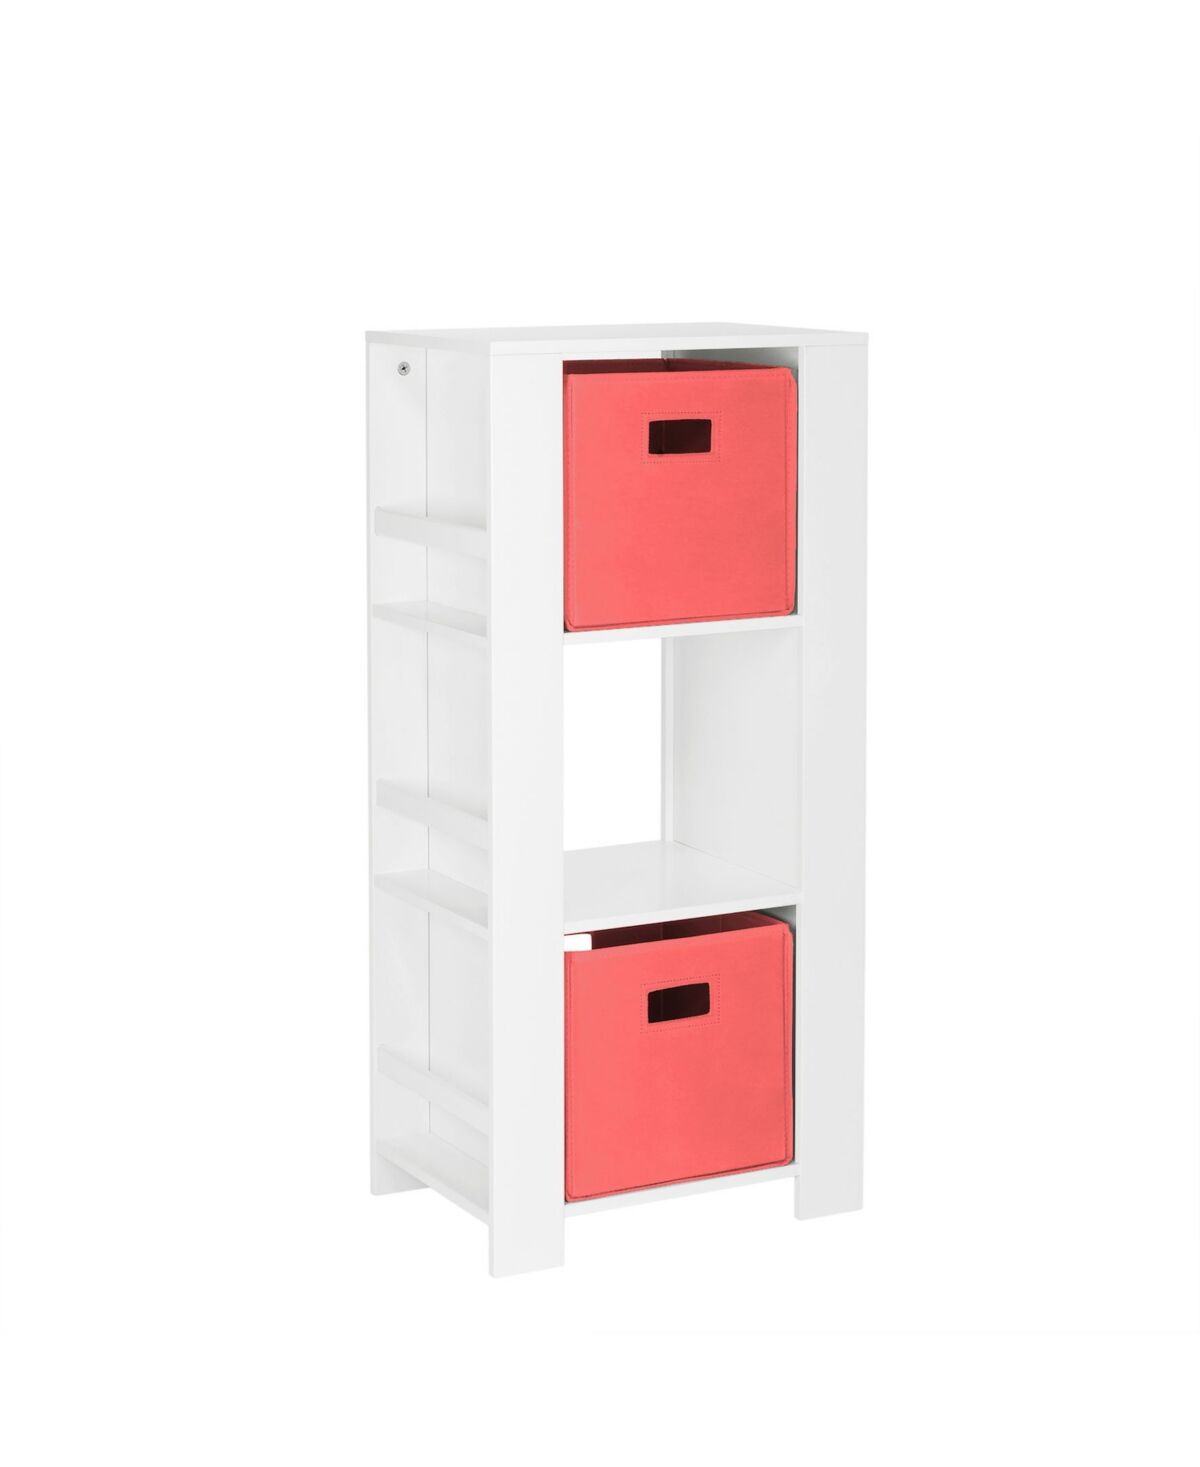 RiverRidge Home Book Nook Collection Kids Cubby Storage Tower with Bookshelves - Coral